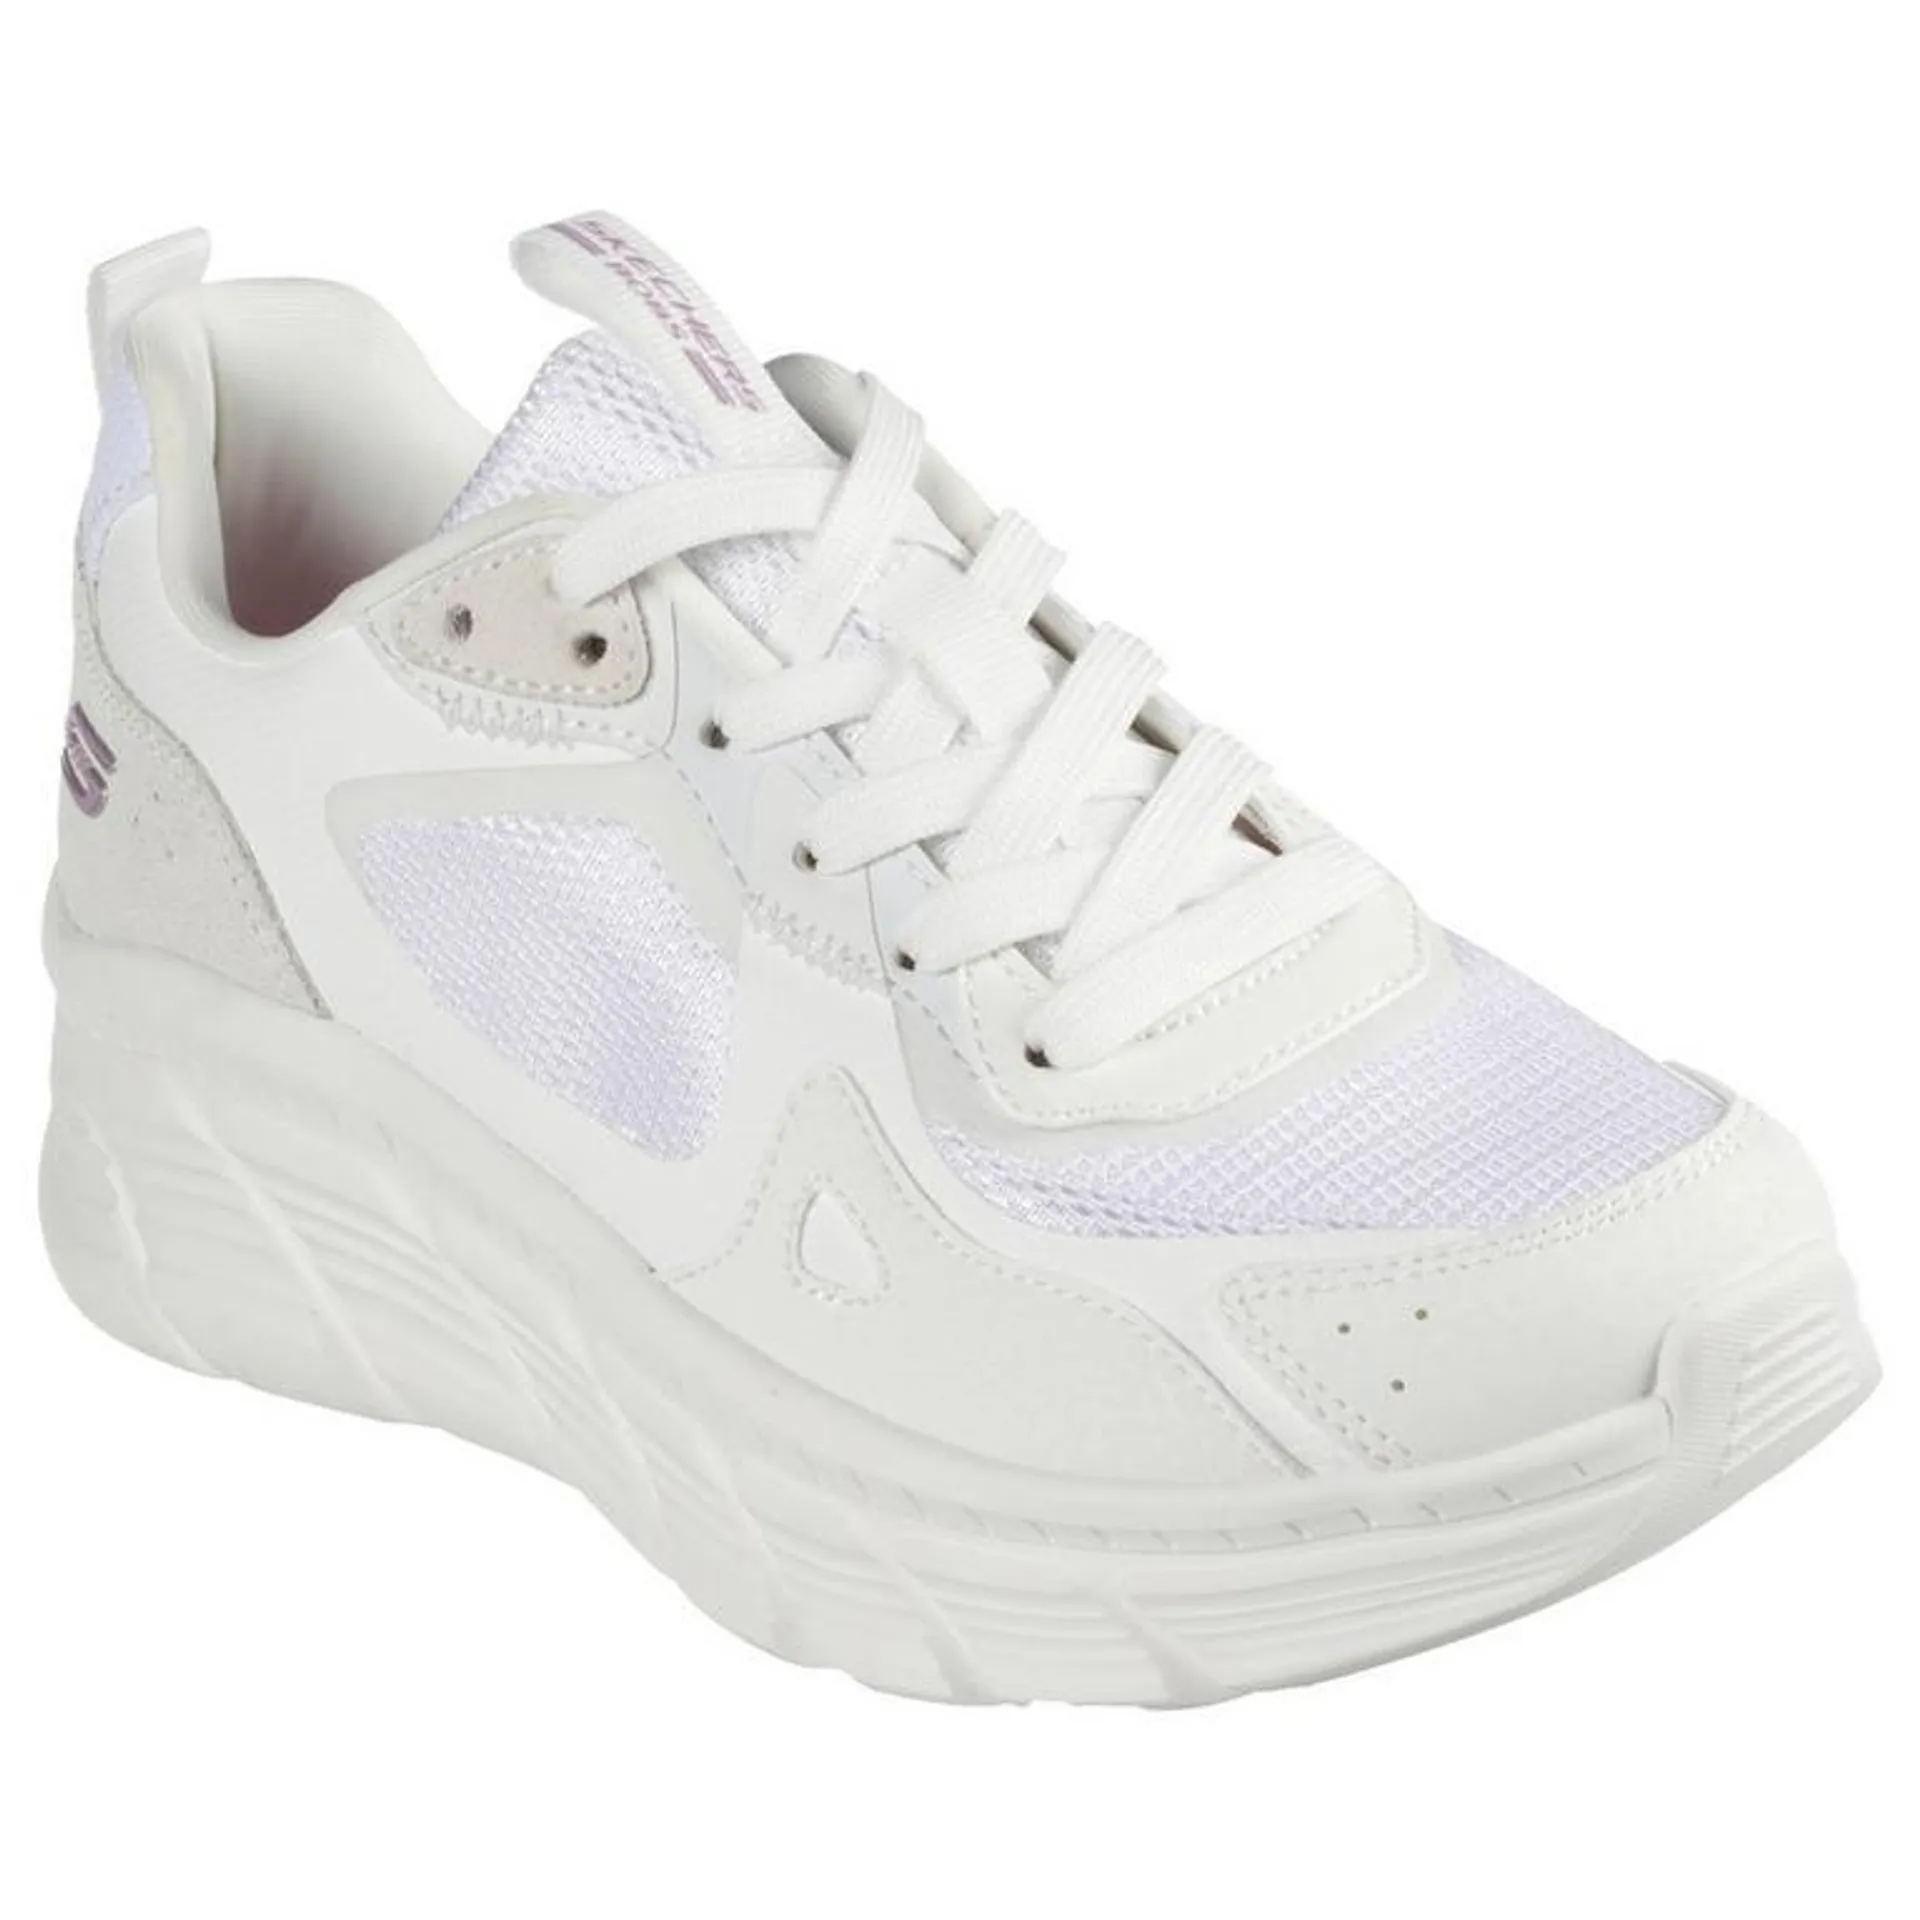 Bobs Sport B Flex HI - Forces Within Trainers Ld34